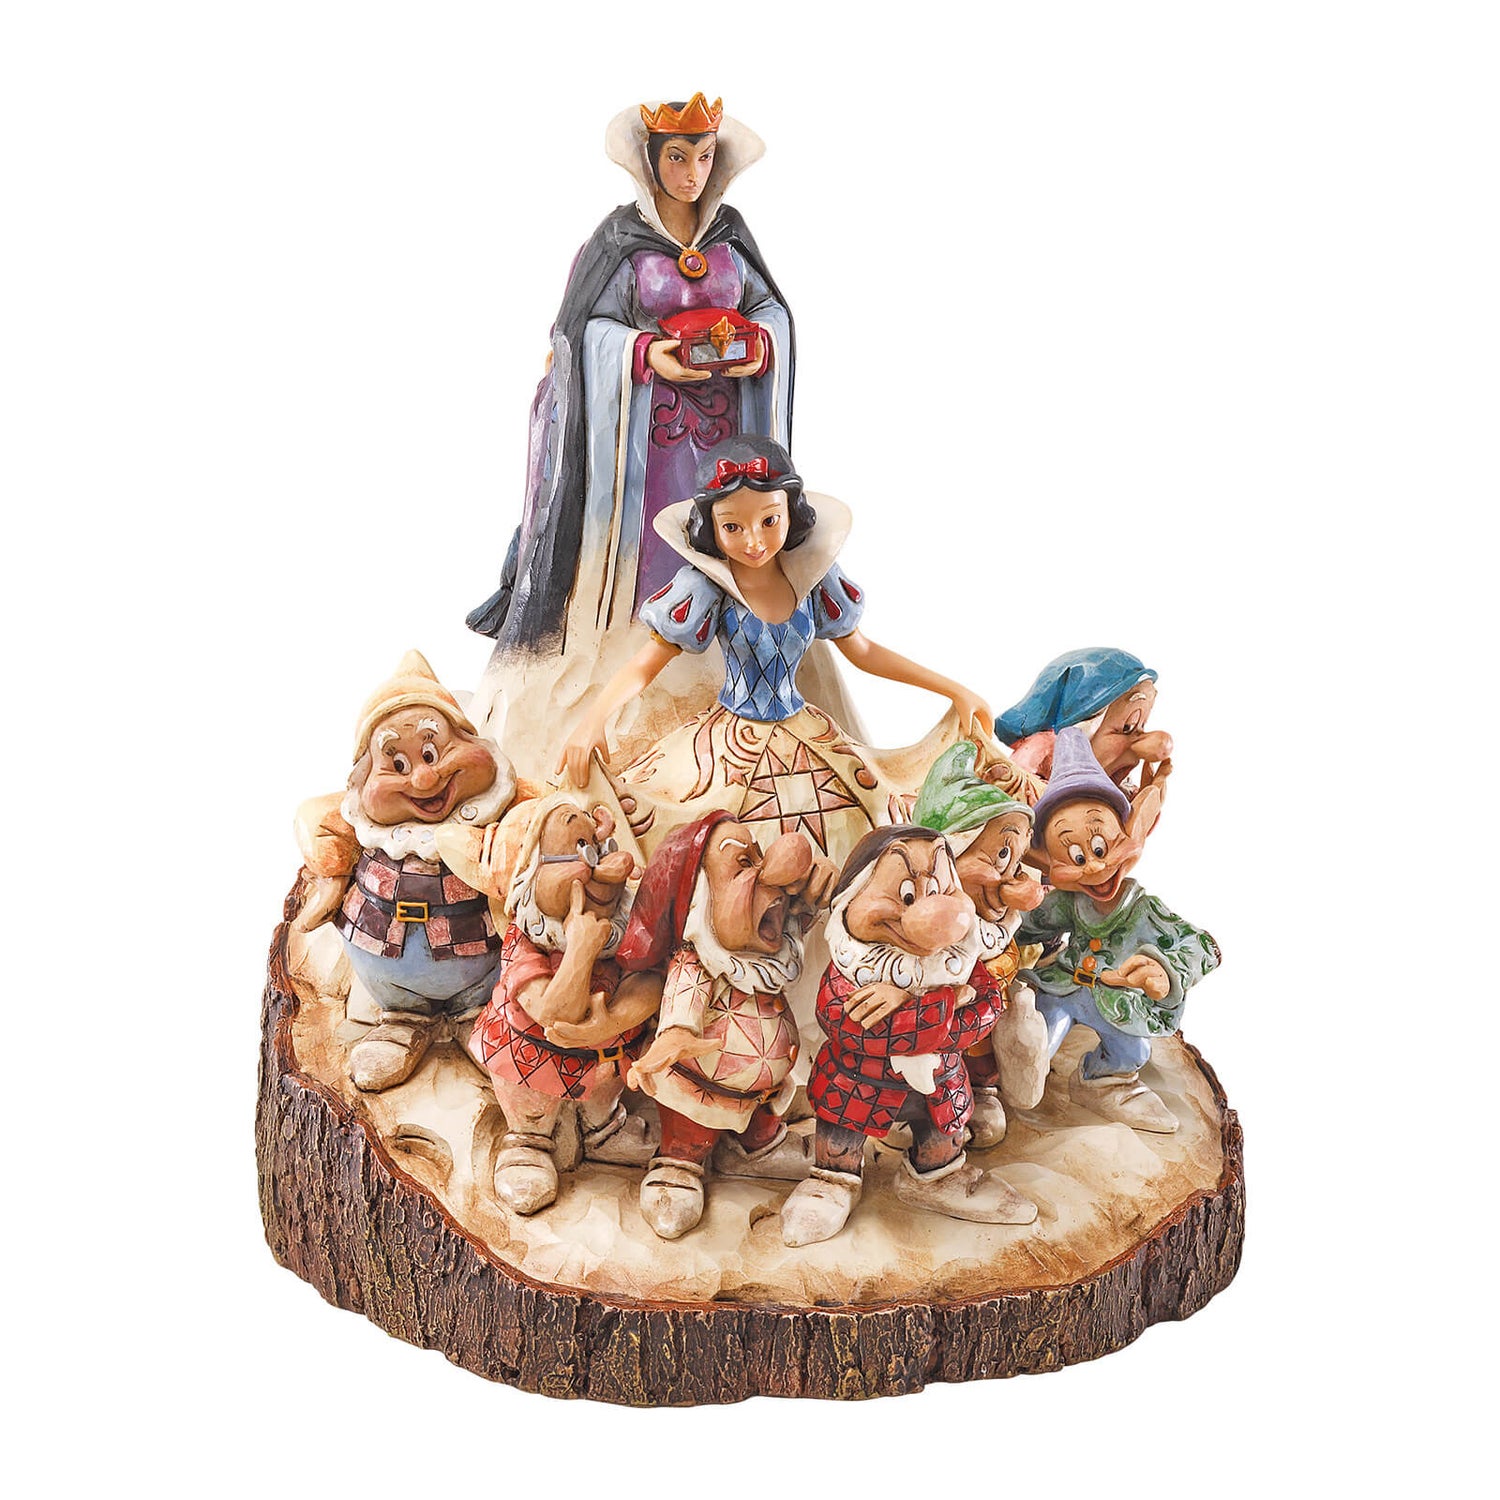 Disney Traditions Snow White The One That Started Carved by Heart Figurine